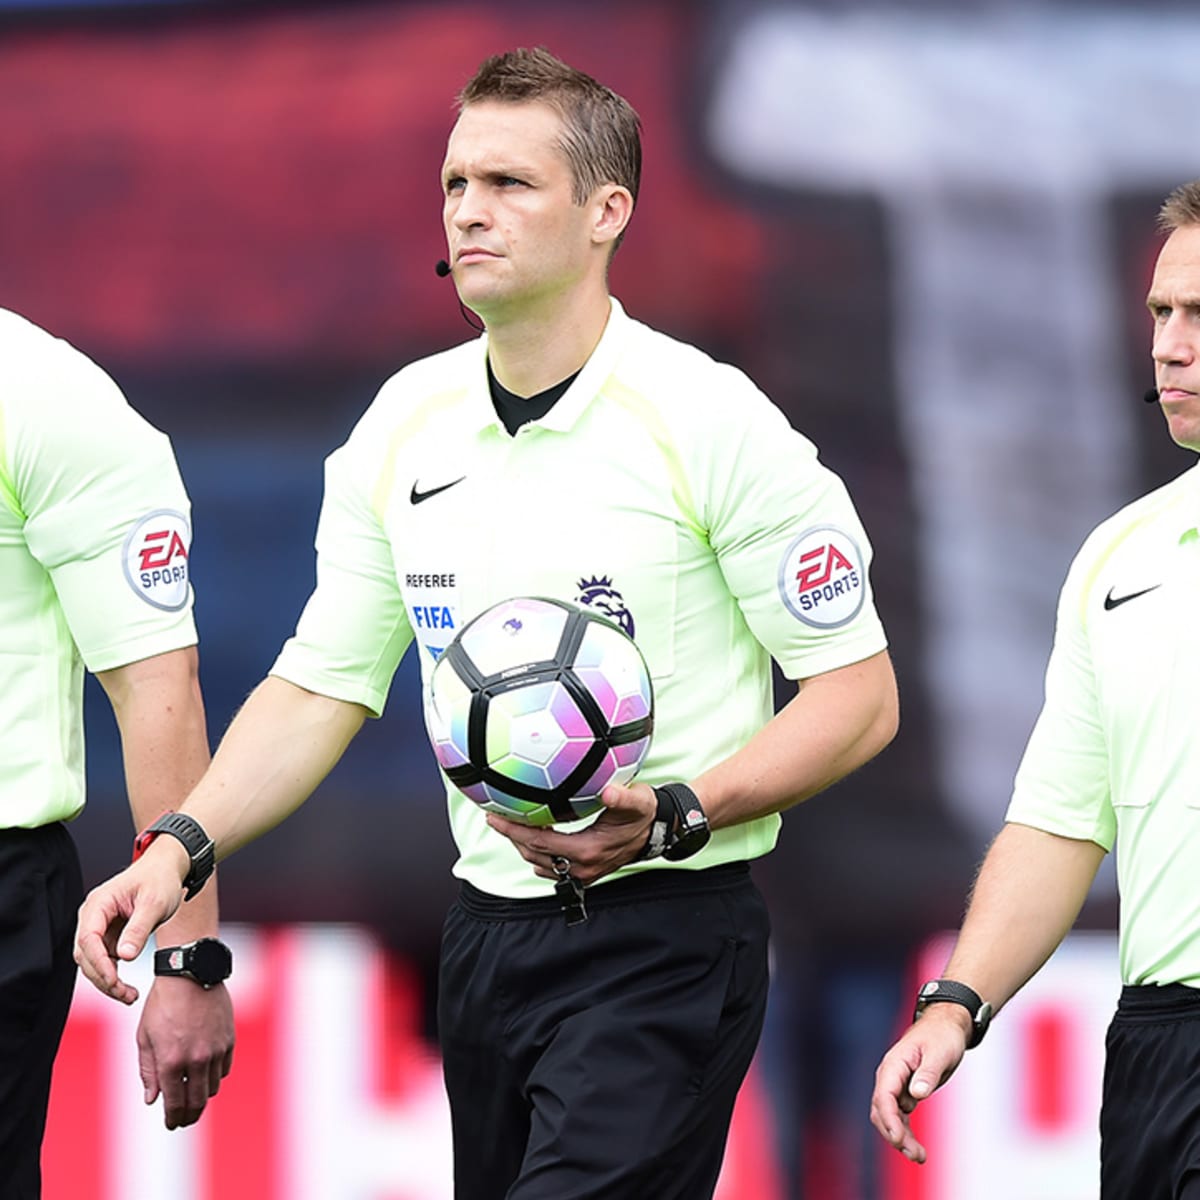 English Premier League refs are getting smartwatches